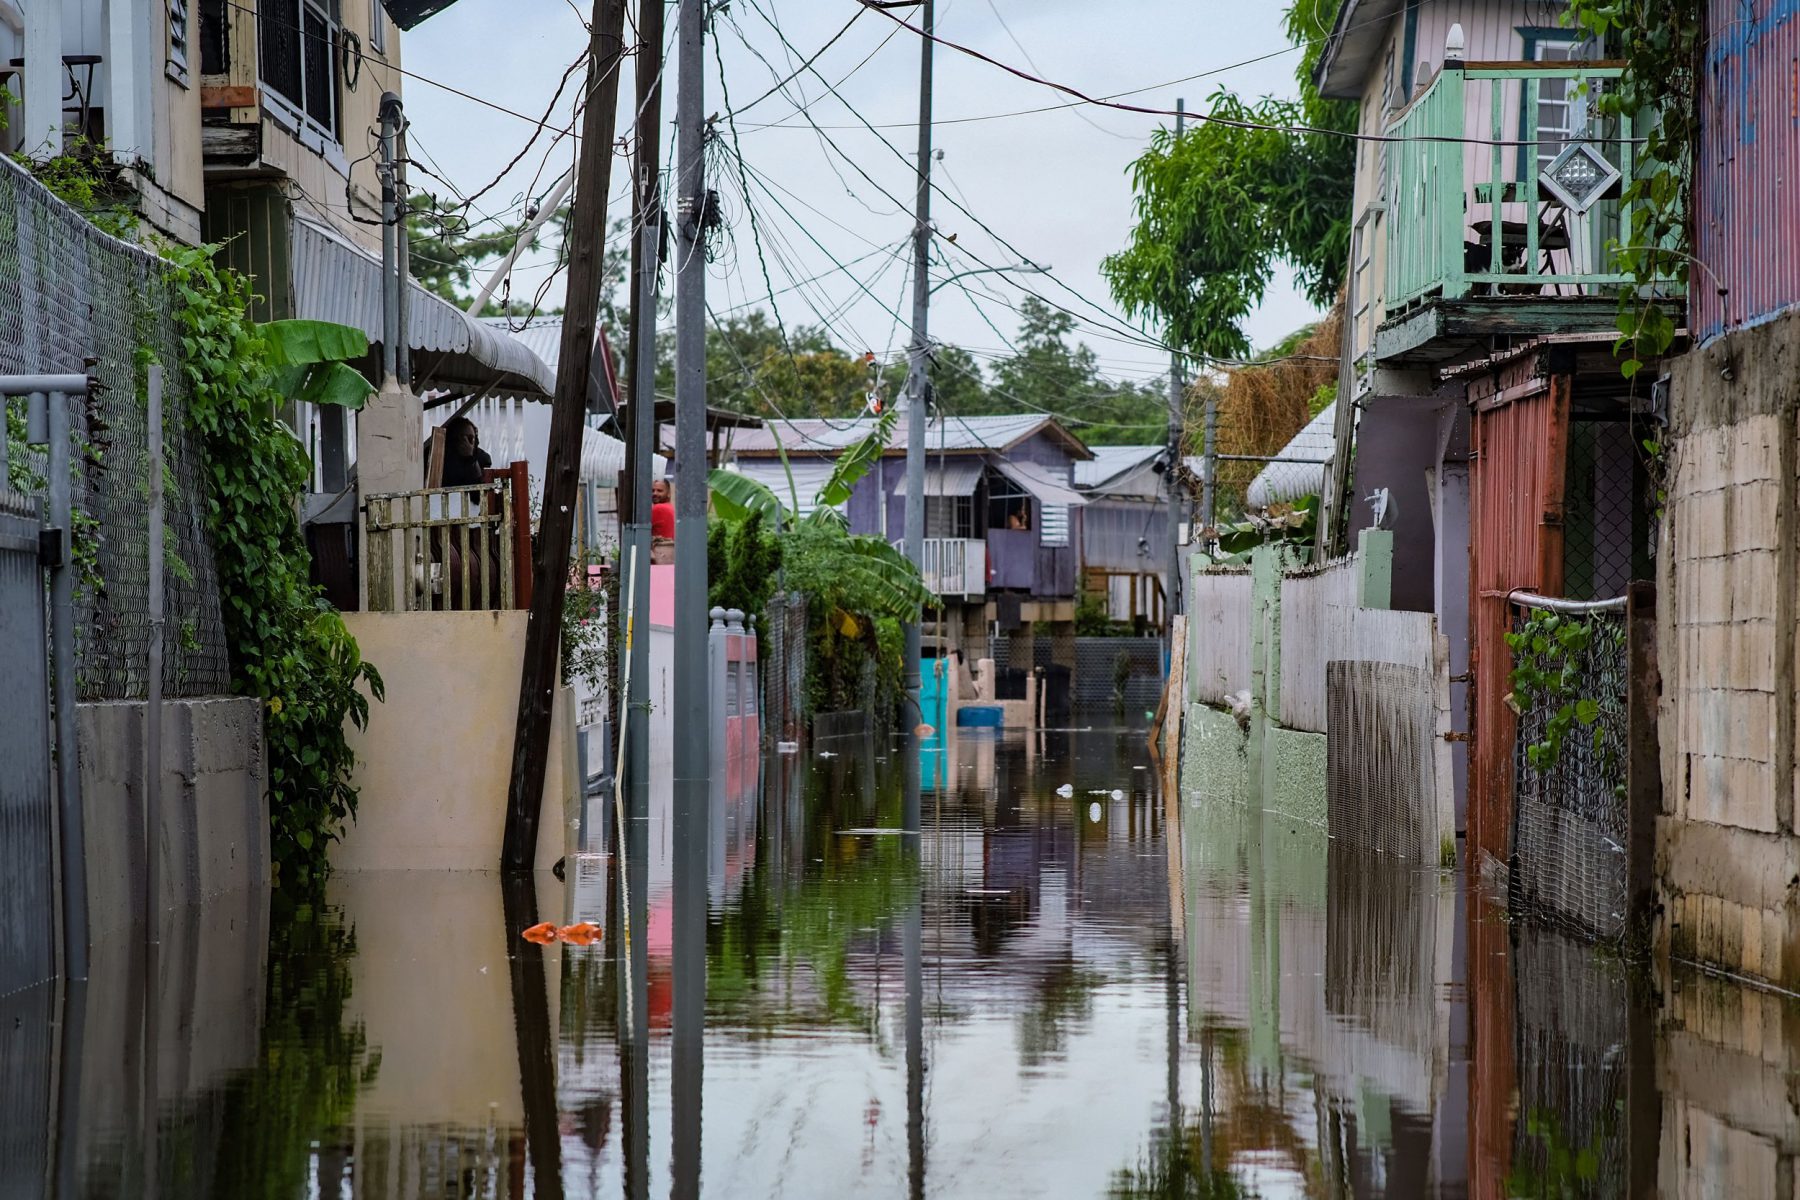 A flooded street in Puerto Rico following the passage of Hurricane Fiona